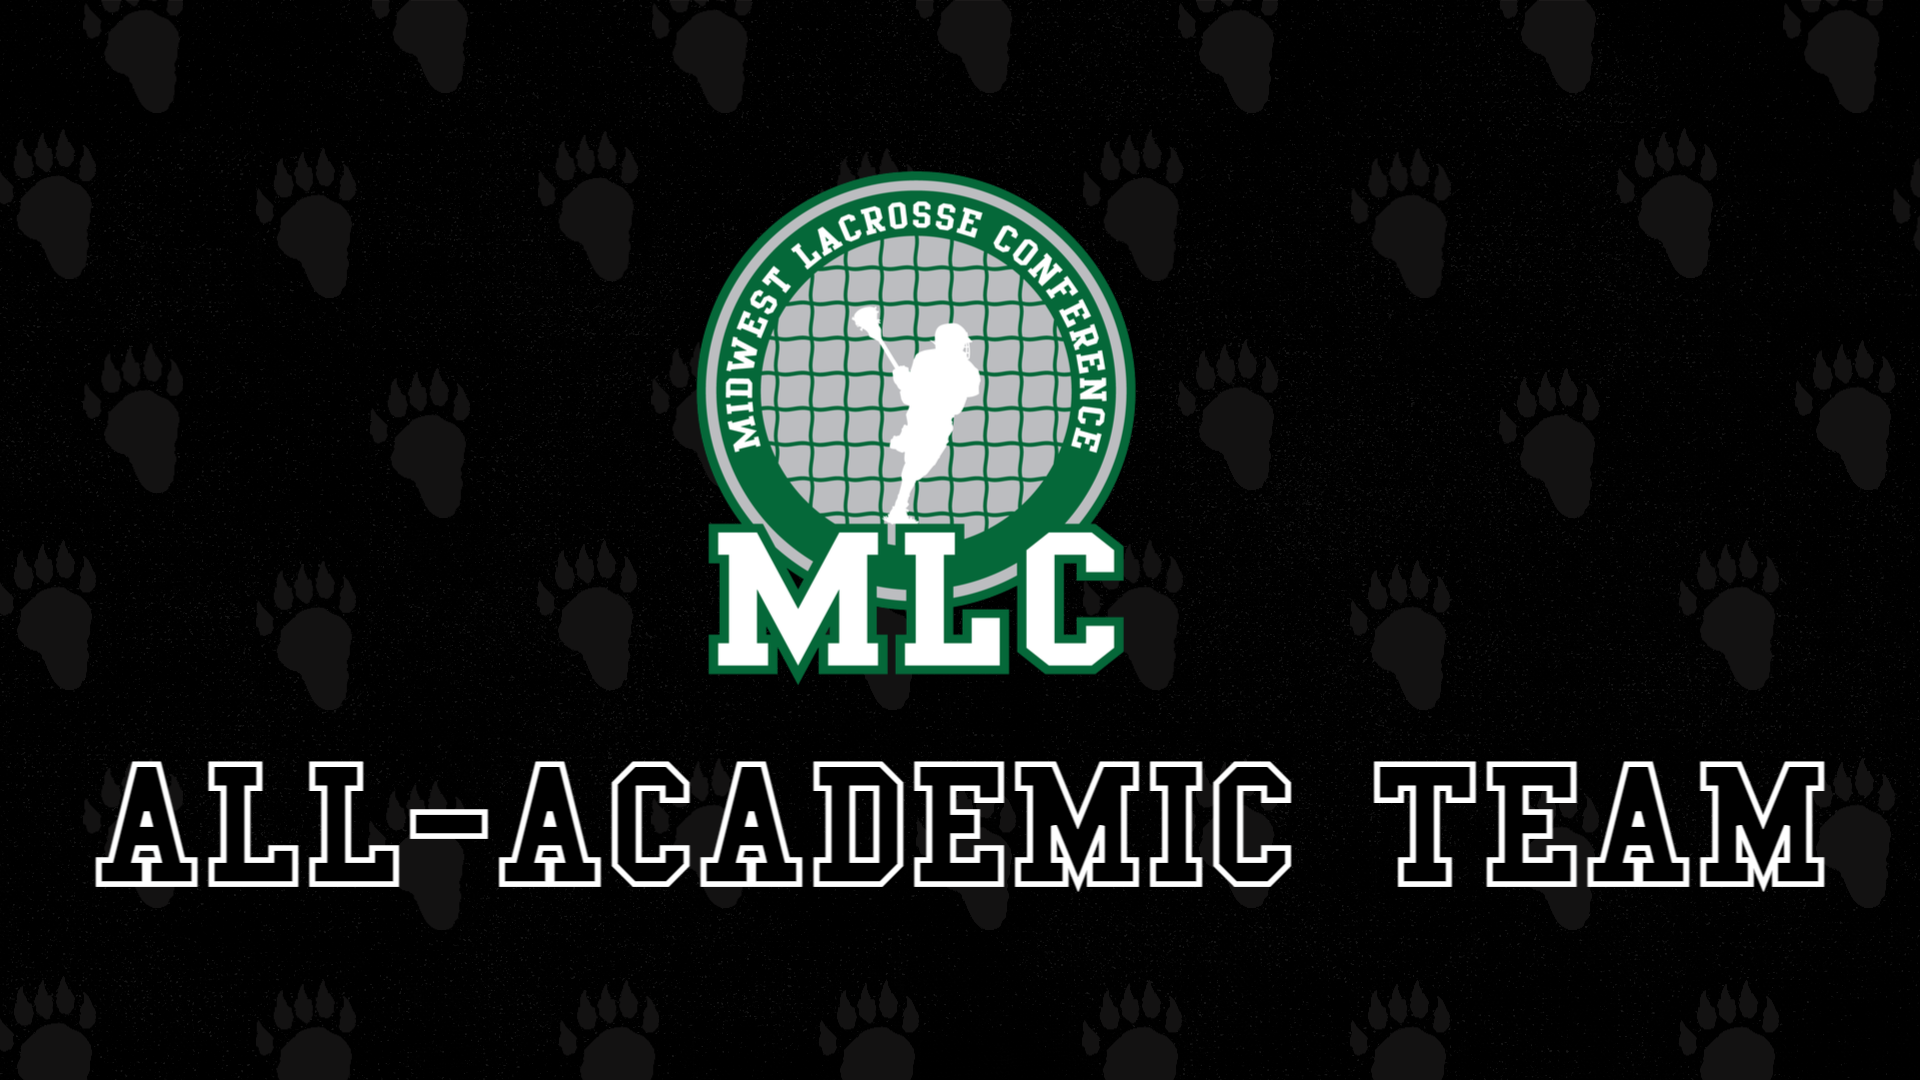 12 Foresters Named to MLC All-Academic Team